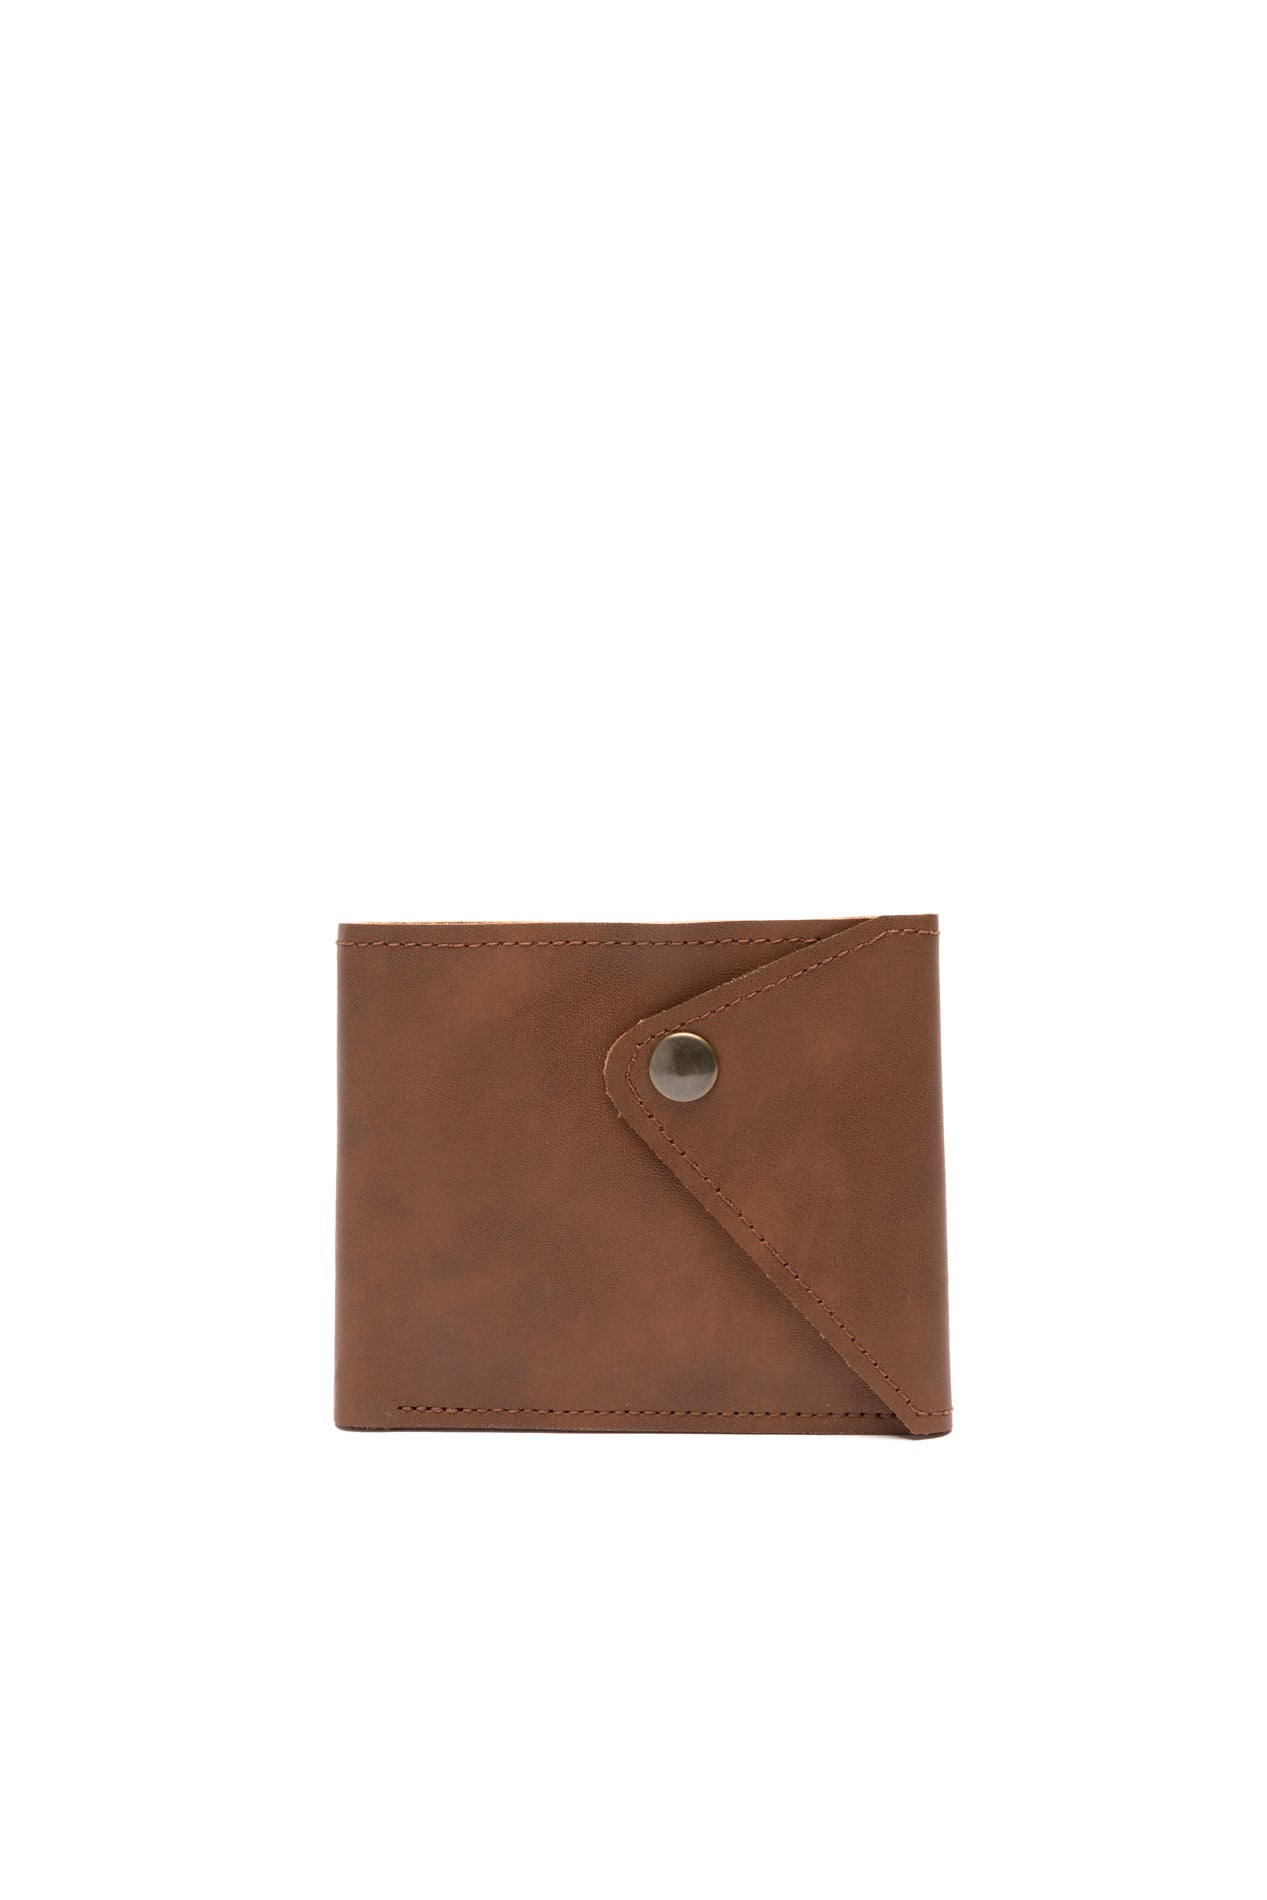 AMERICAN WALLET WITH BROHE | Brown